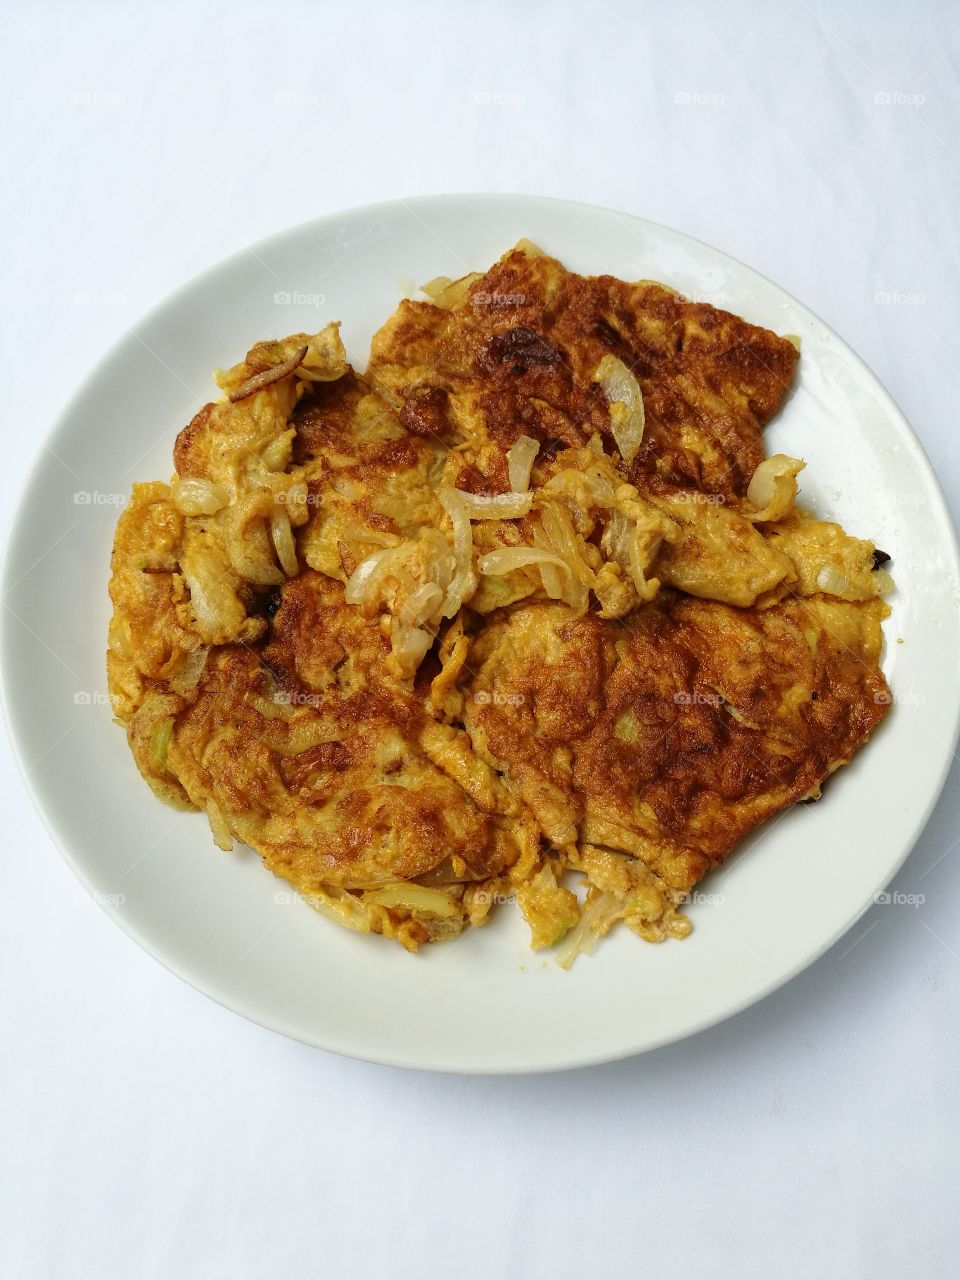 A plate of Thai omelette on white background.